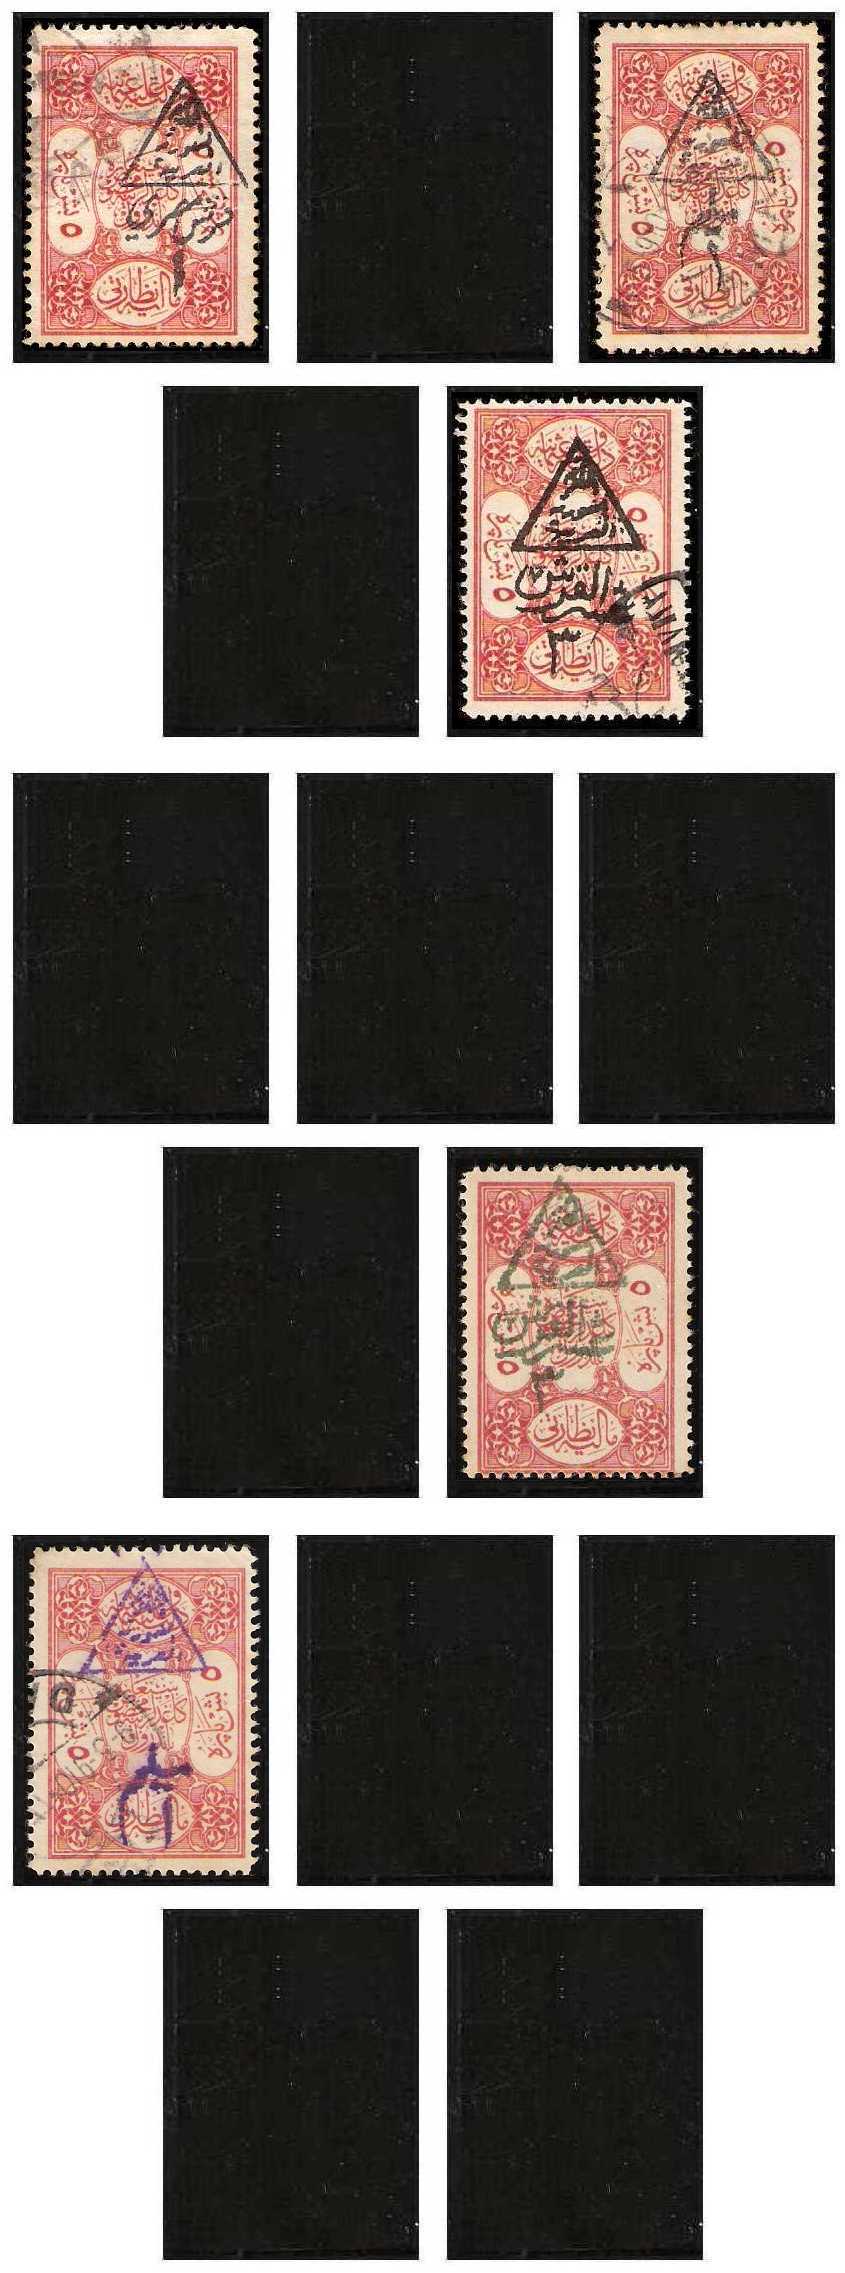 3.1920 Syria, Mi 76/80, Overprinted Fiscal Stamps of the Ottoman Empire